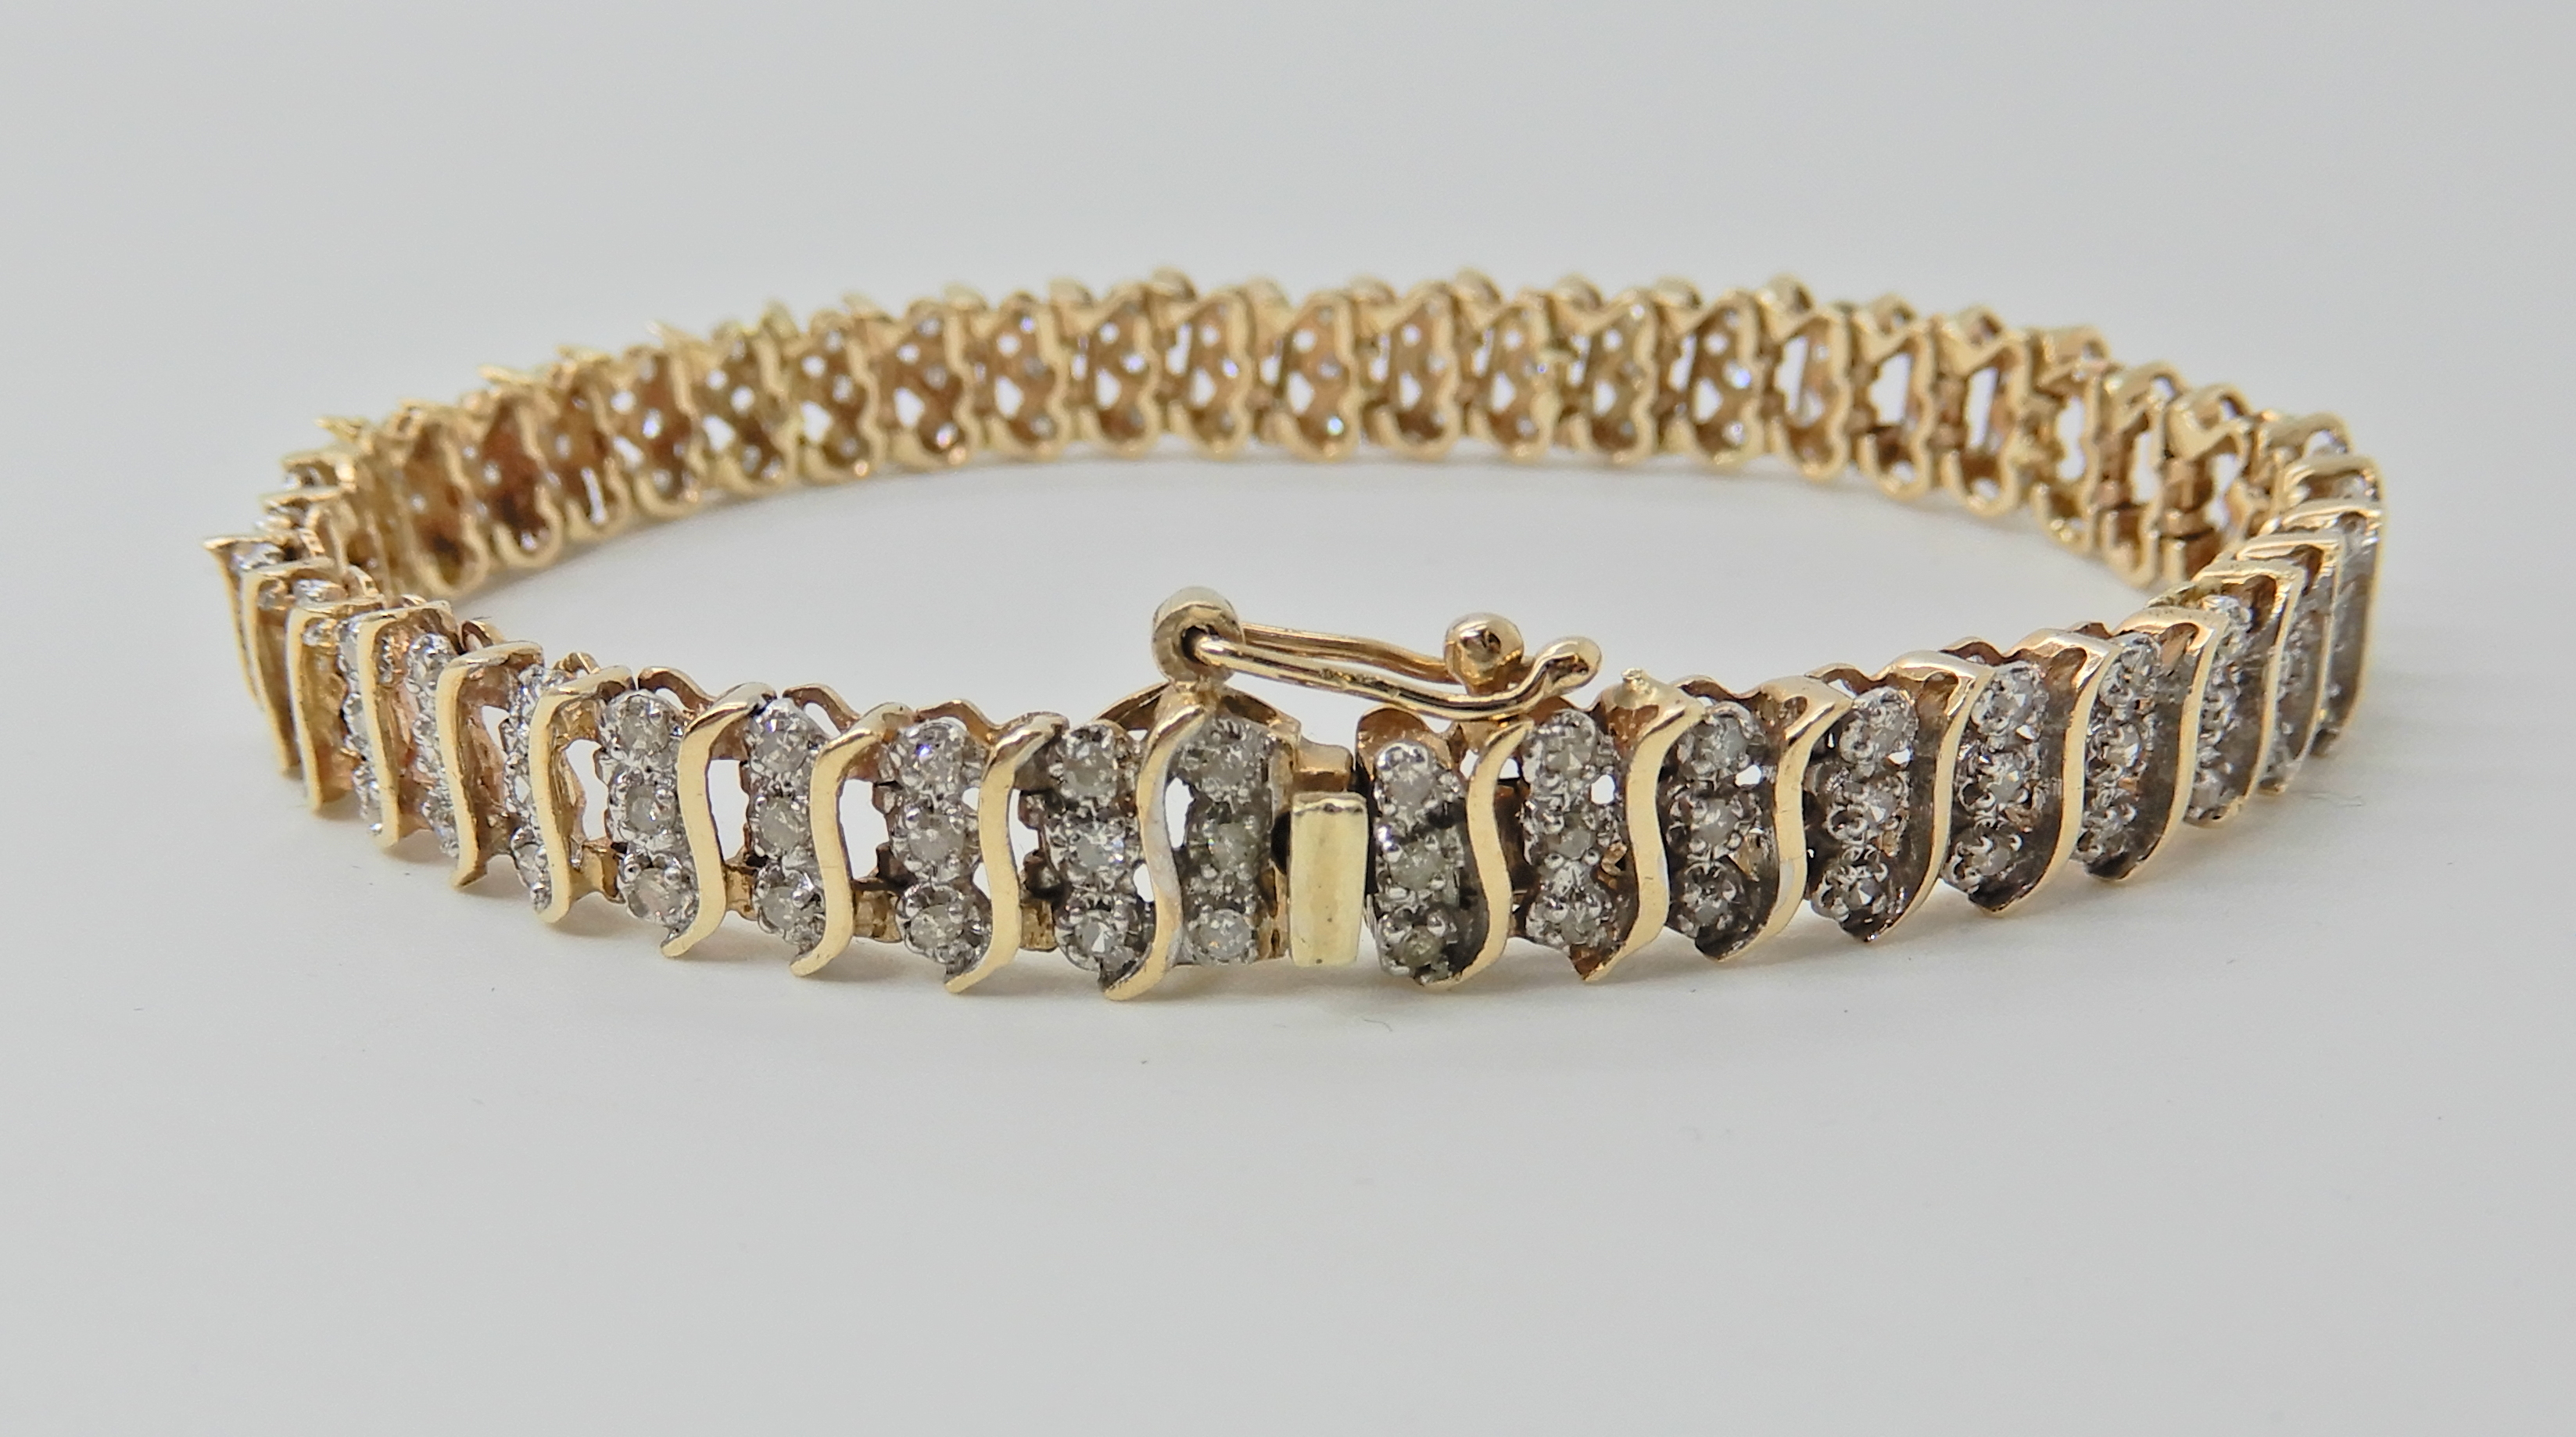 A 9ct gold diamond set bracelet, with 'S' shaped links, stamped 375 and the diamond content is